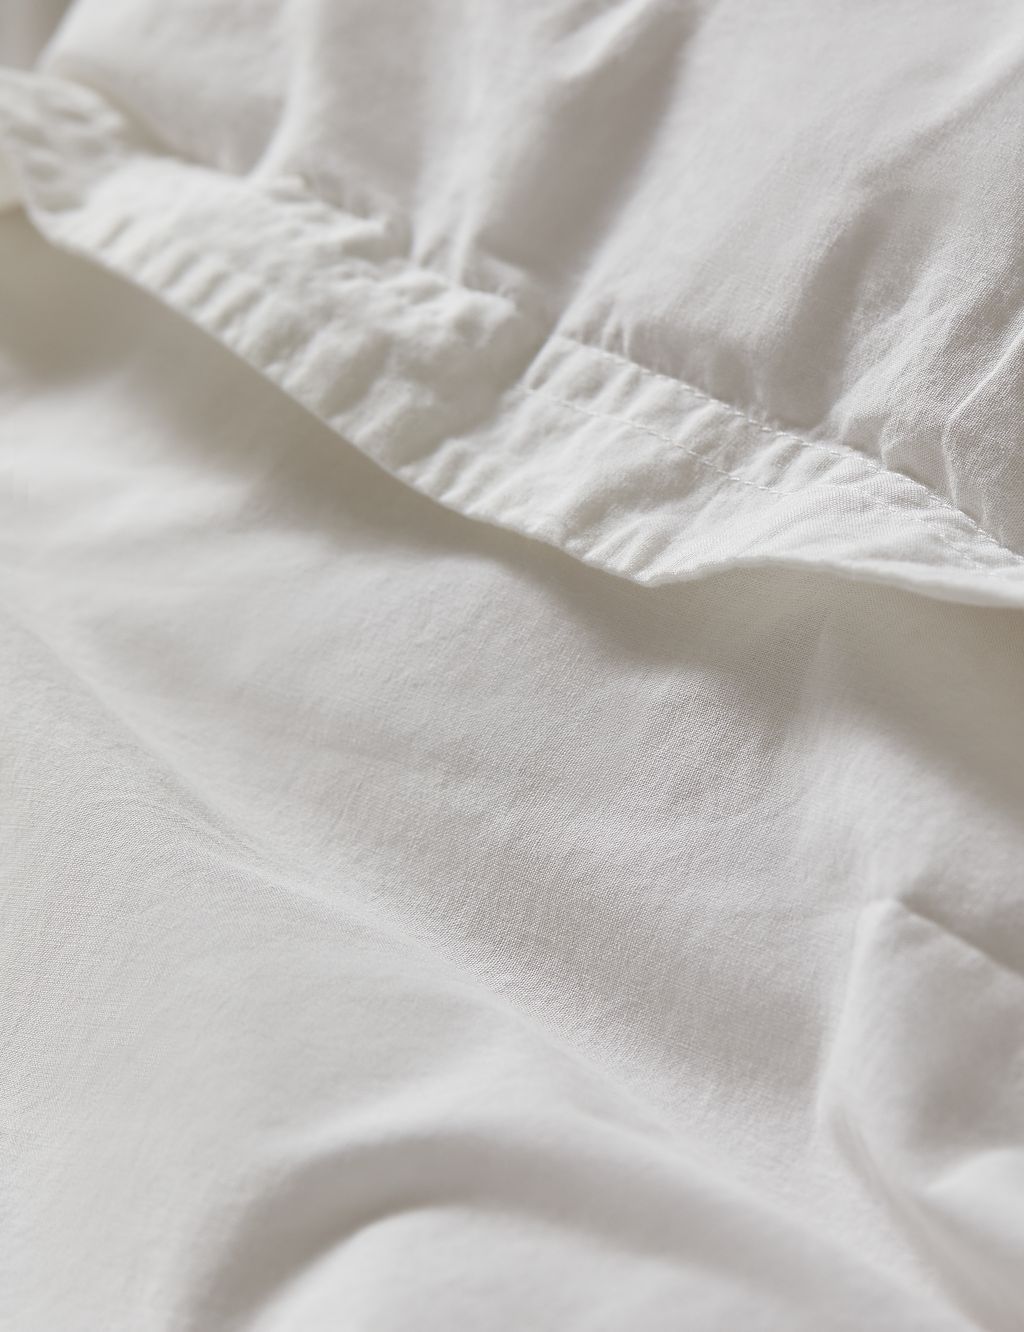 Washed Cotton Duvet Cover image 4